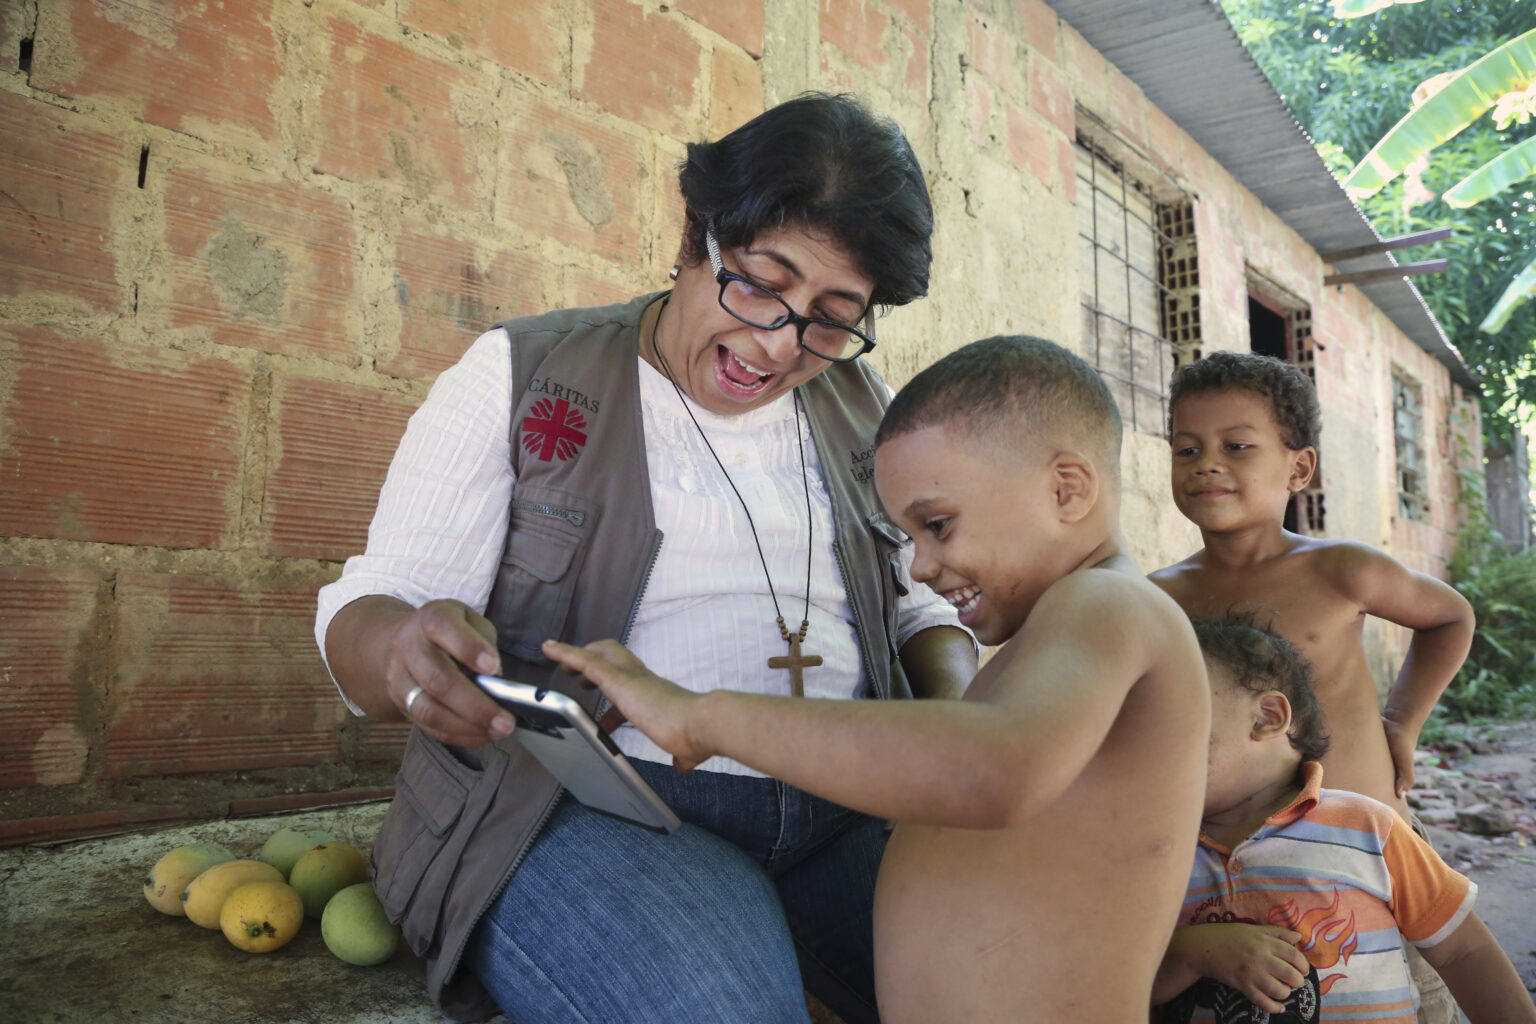 Sister Maria José of Caritas Los Teques plays with Yonaikel, 5. His two younger siblings are currently receiving nutritional support from Caritas due to undernutrition. The current minimum monthly salary averages to about $1.50 and covers only 2 percent of the minimum nutritional basket. As of March 2018, it would require 73 monthly salaries solely to cover the cost of feeding a family. Families cope by selling off goods, cutting back on meals and the quantity of food served at each meal. Routine growth monitoring sessions conducted by Caritas has shown that 70 percent of children under 5 show signs of some form of nutrition with 8 percent from severe malnutrition. Galloping inflation has pushed 92 percent of the population into poverty. The current minimum monthly salary averages to about $1.50 and covers only 2 percent of the minimum nutritional basket. As of March 2018, it would require 73 monthly salaries solely to cover the cost of feeding a family. Families cope by selling off goods, cutting back on meals and the quantity of food served at each meal. Routine growth monitoring sessions conducted by Caritas has shown that 70 percent of children under 5 show signs of some form of nutrition with 8 percent from severe malnutrition.